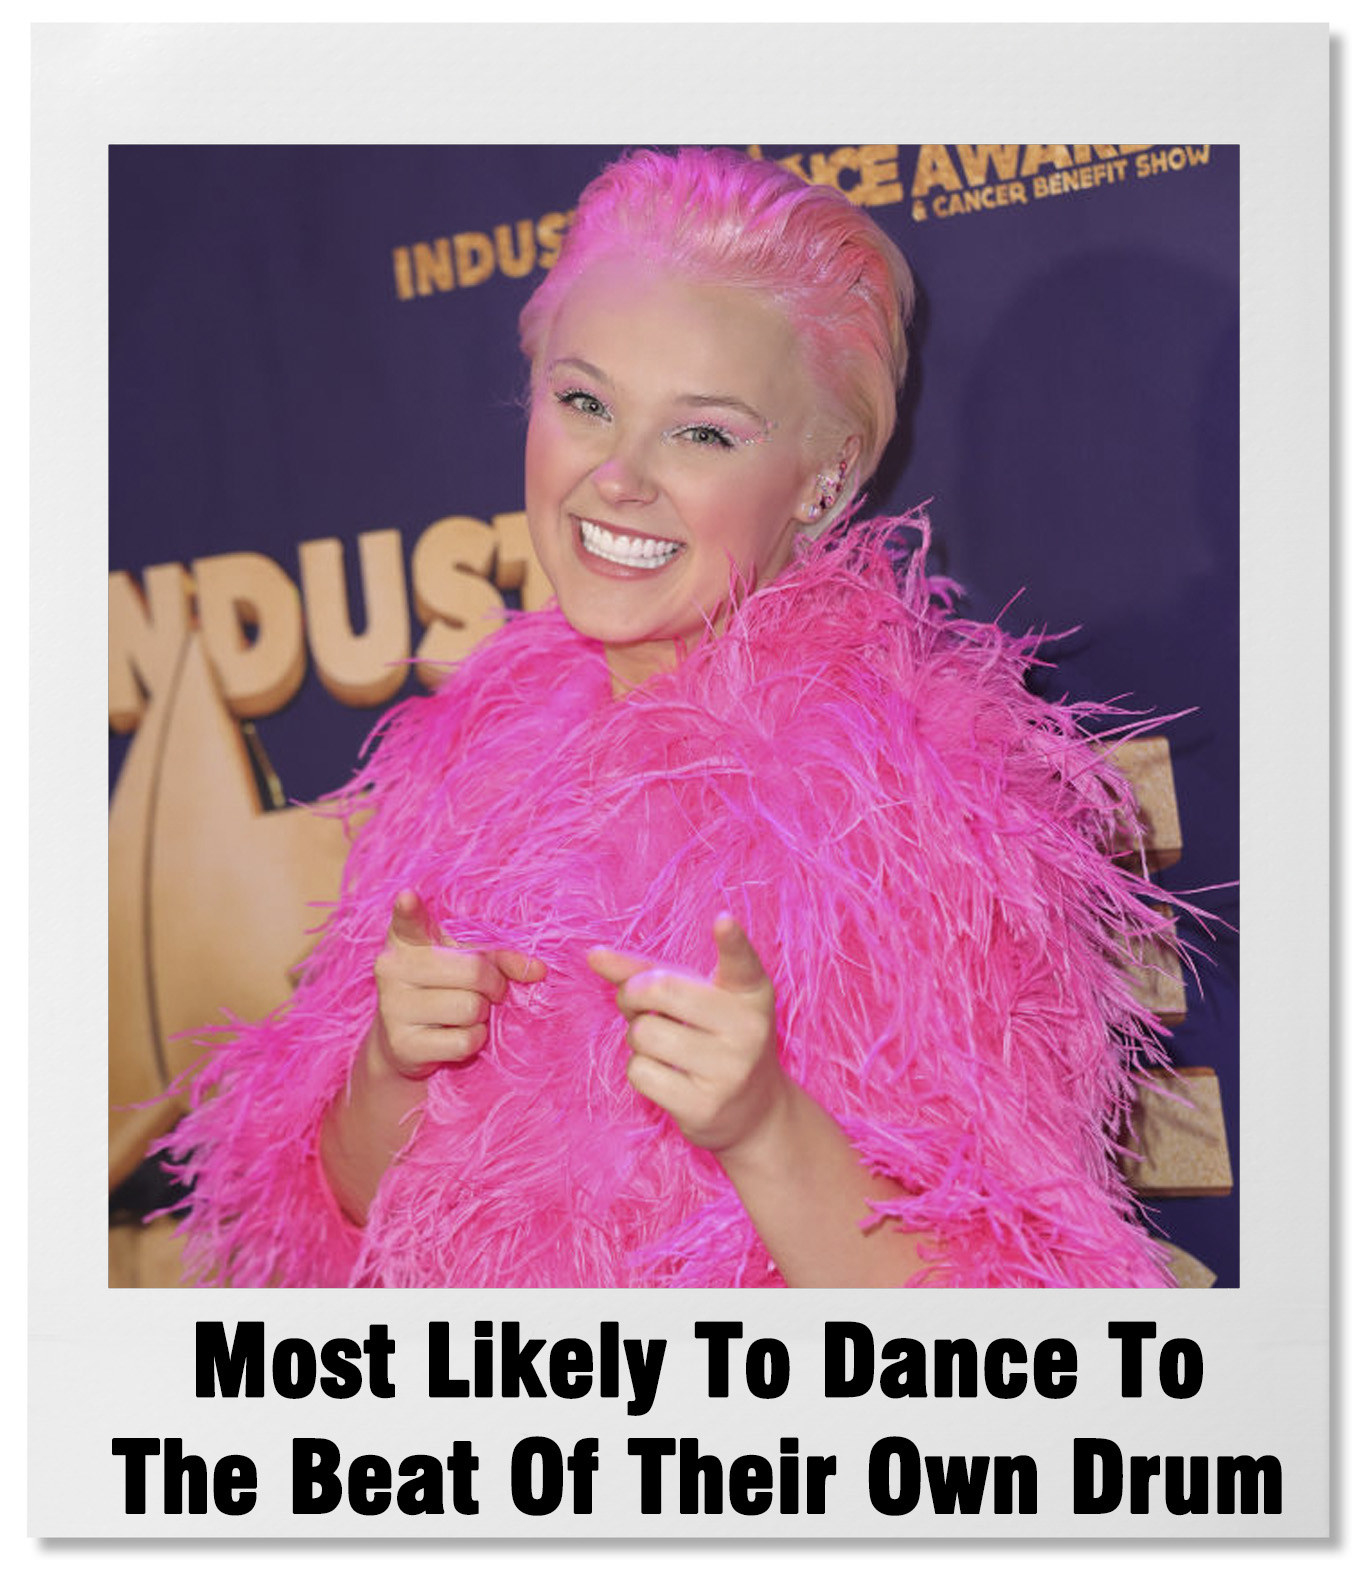 jojo siwa with text &#x27;most likely to dance to the beat of their own drum&#x27;